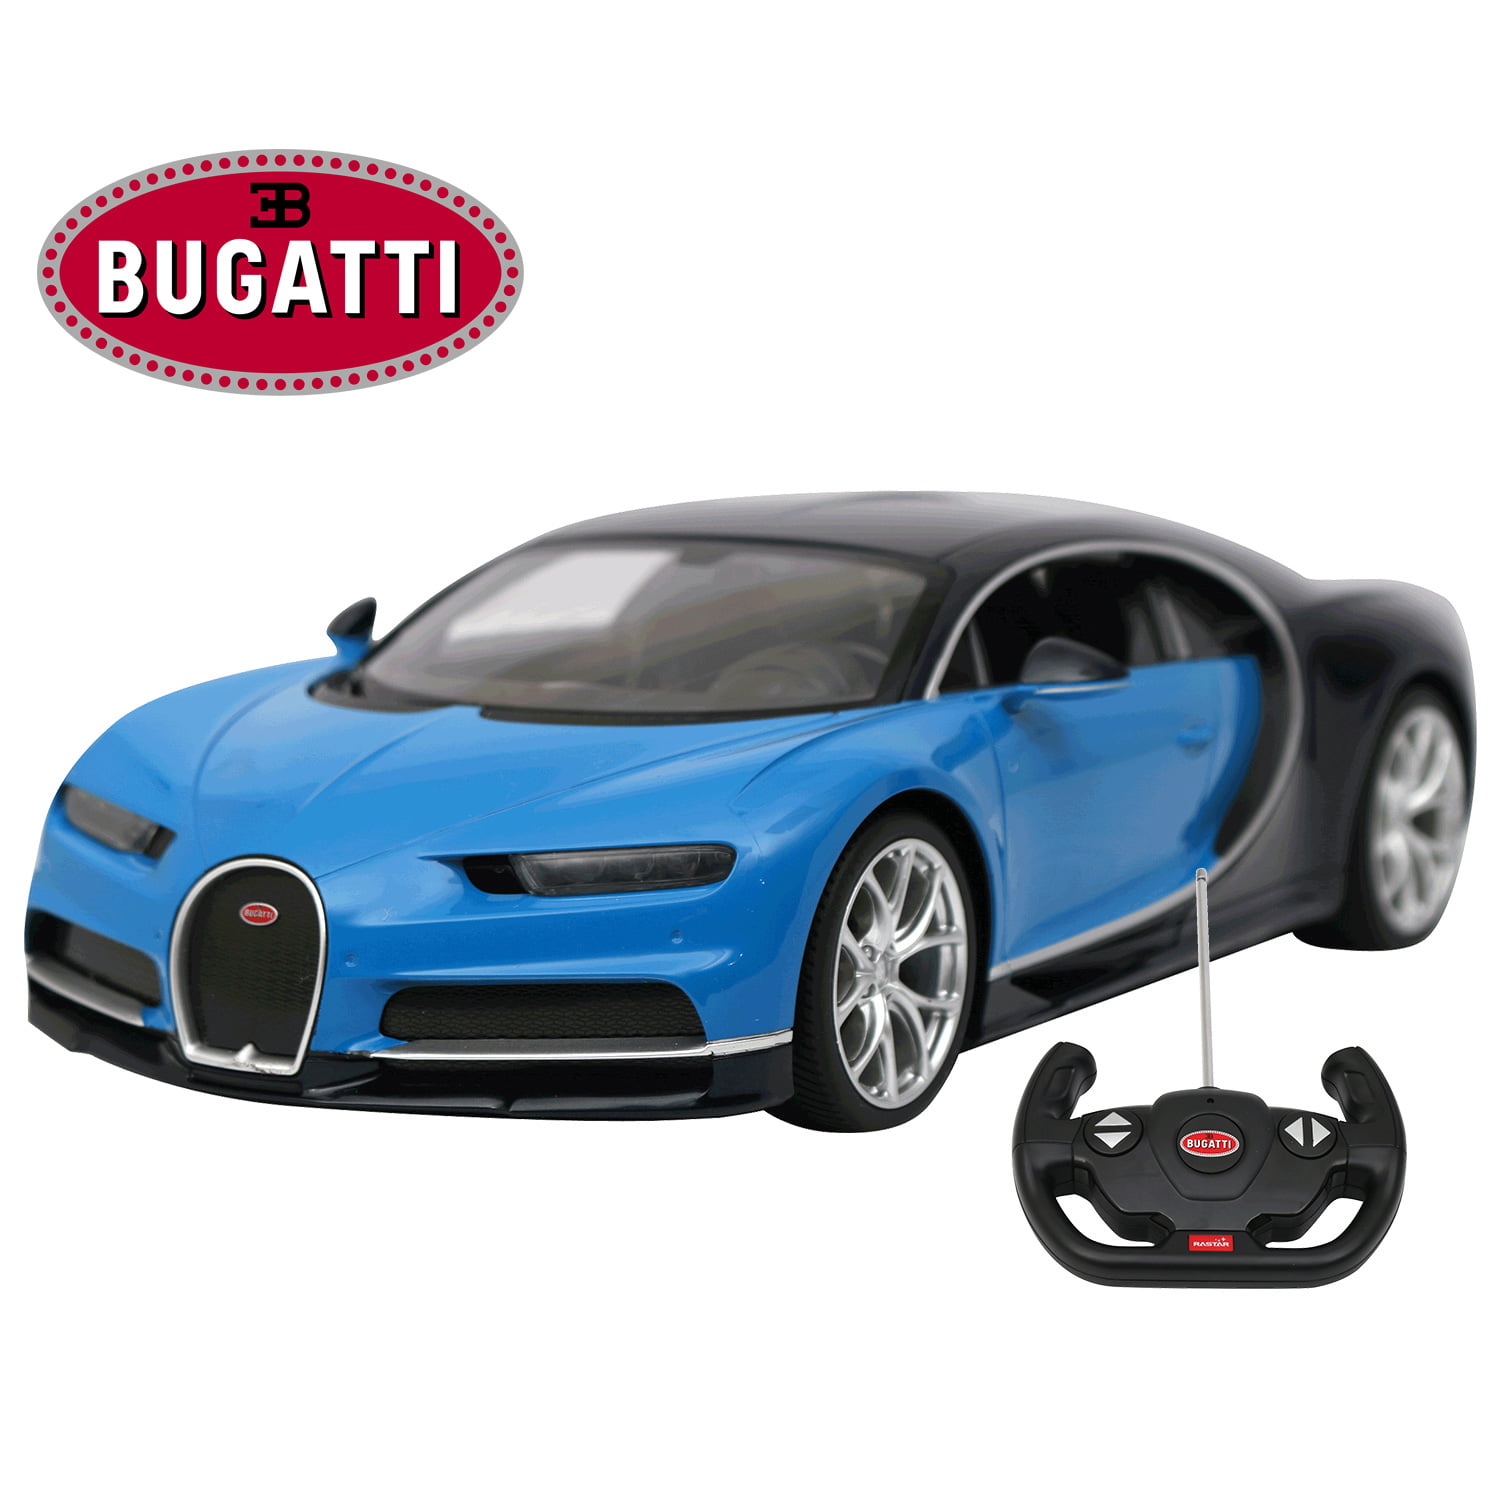 Adults Officially Licensed Bugatti Veyron Chiron Remote Control Car,1:24 Scale Sport Racing Toy Car Model Vehicle for Kids 76100 Red Girls and Boys BEZGAR Bugatti Toy Car 